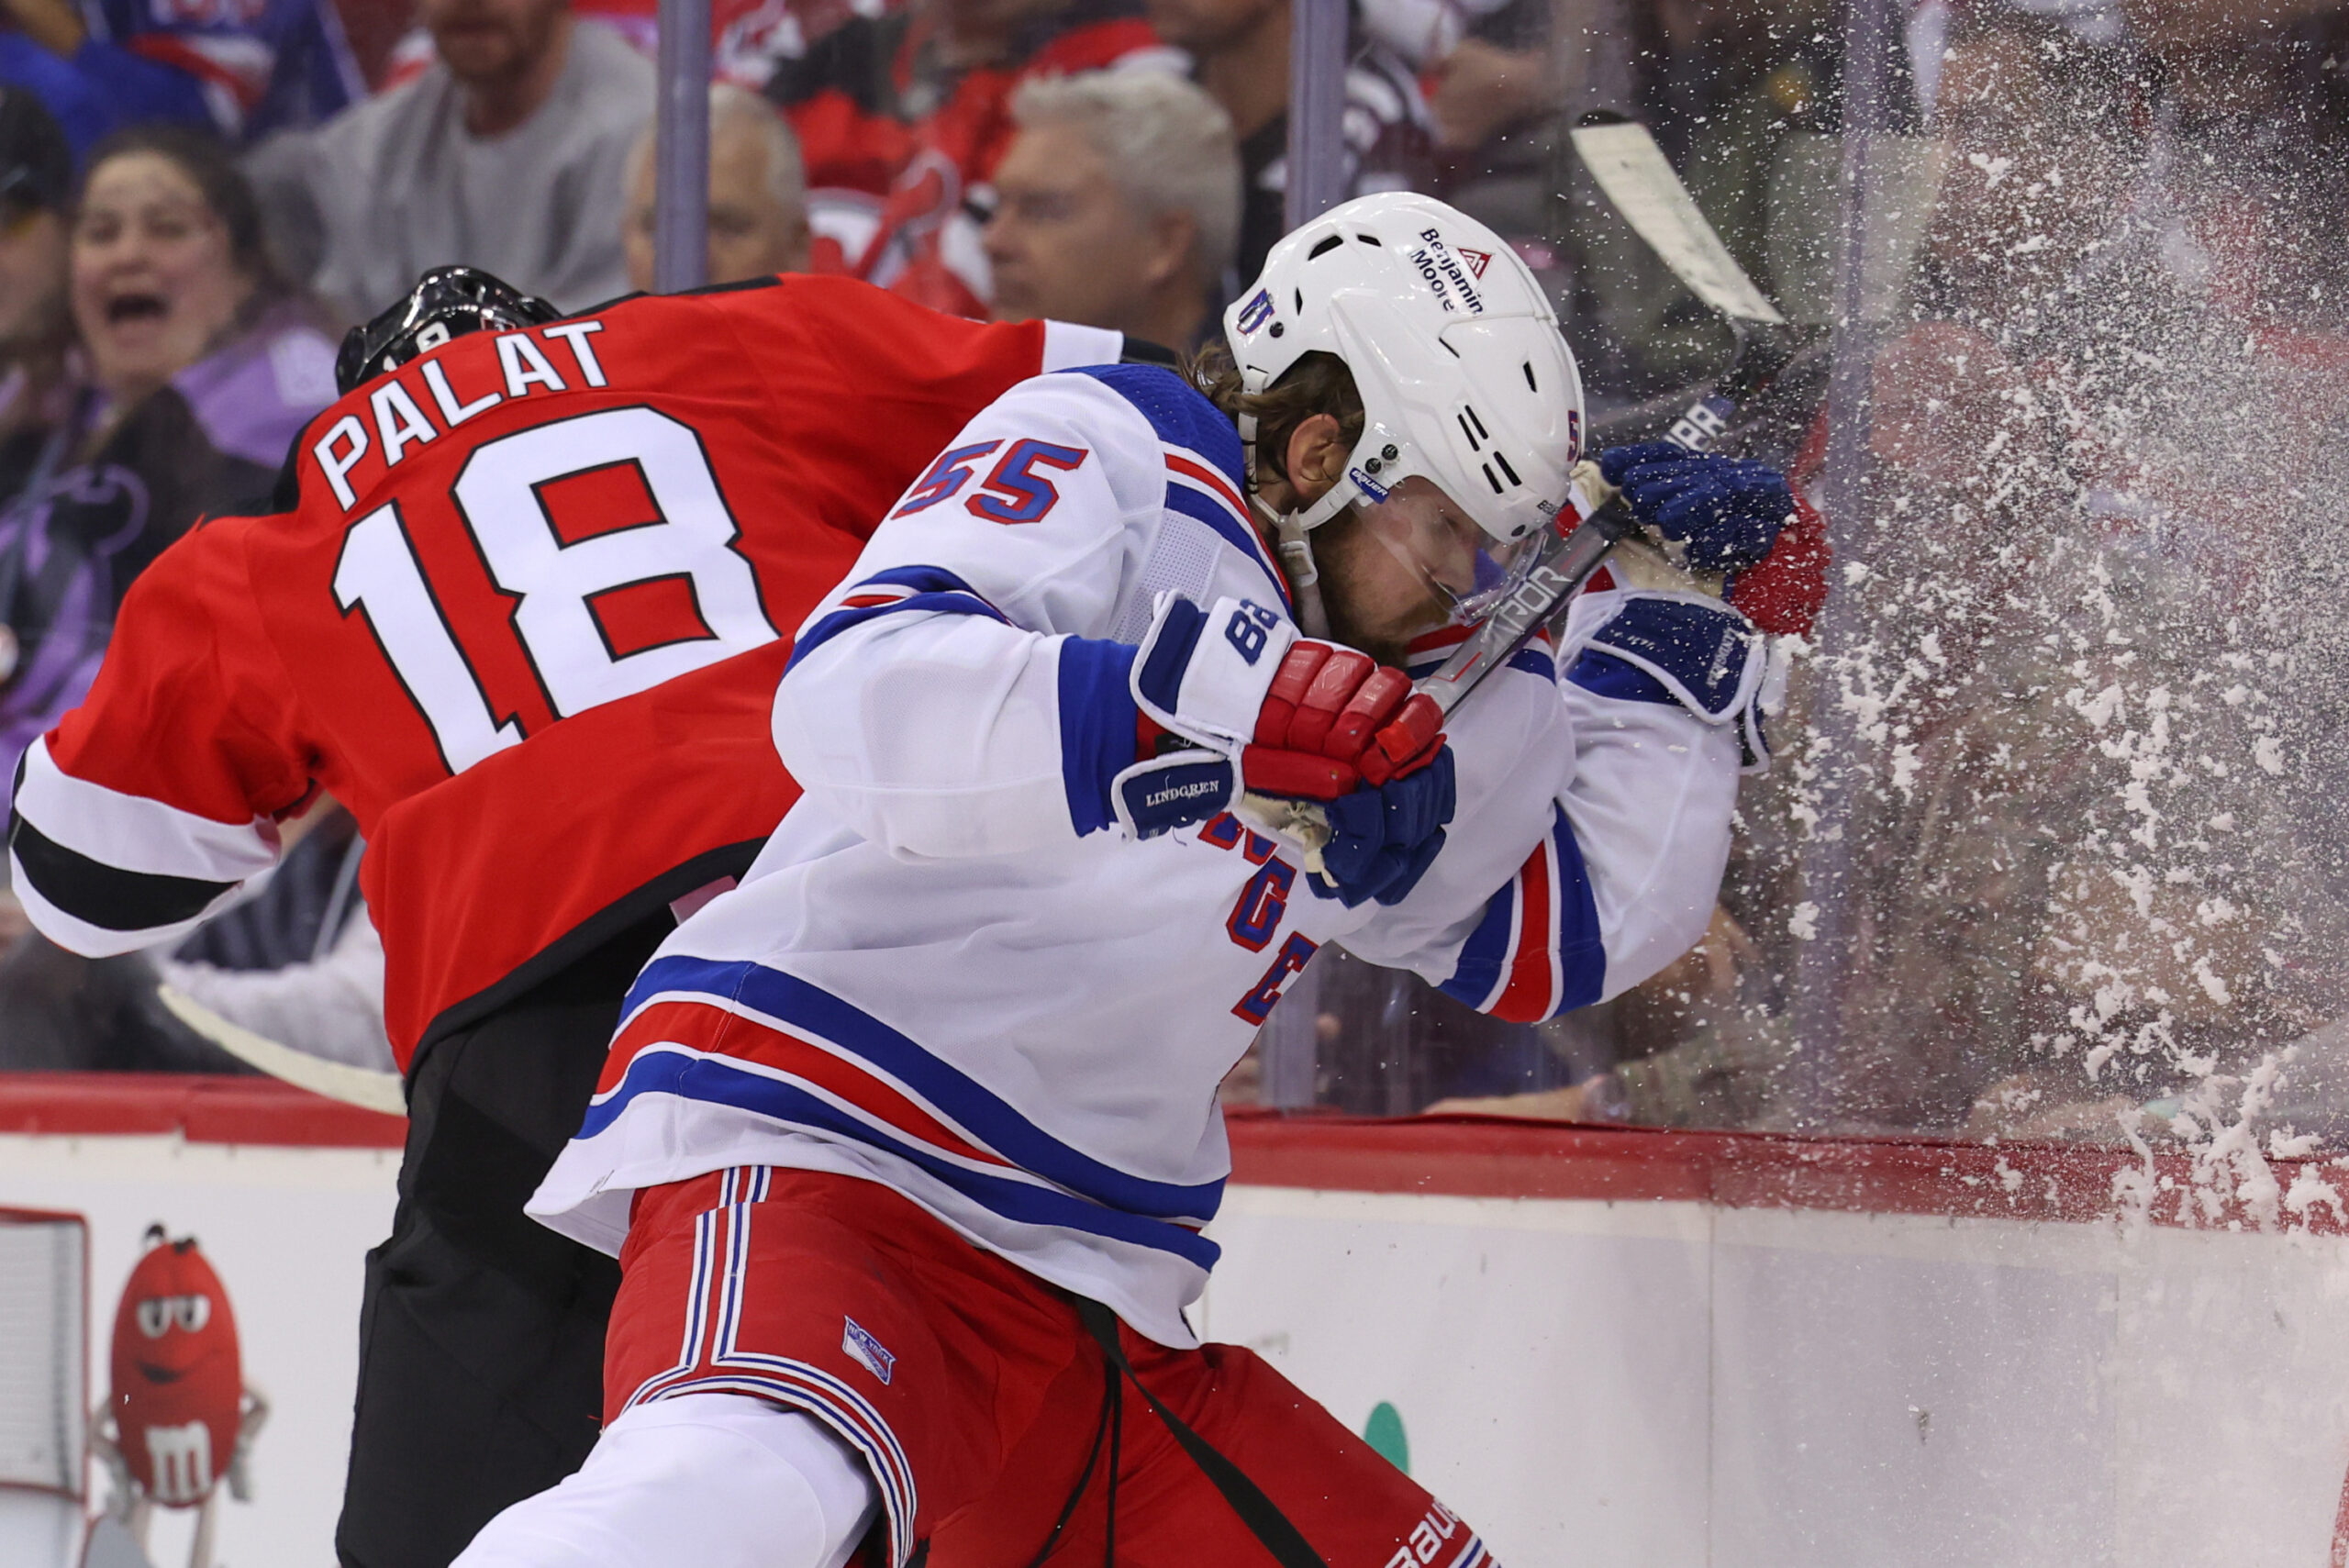 New York Rangers need a strong showing versus Devils after unacceptable loss